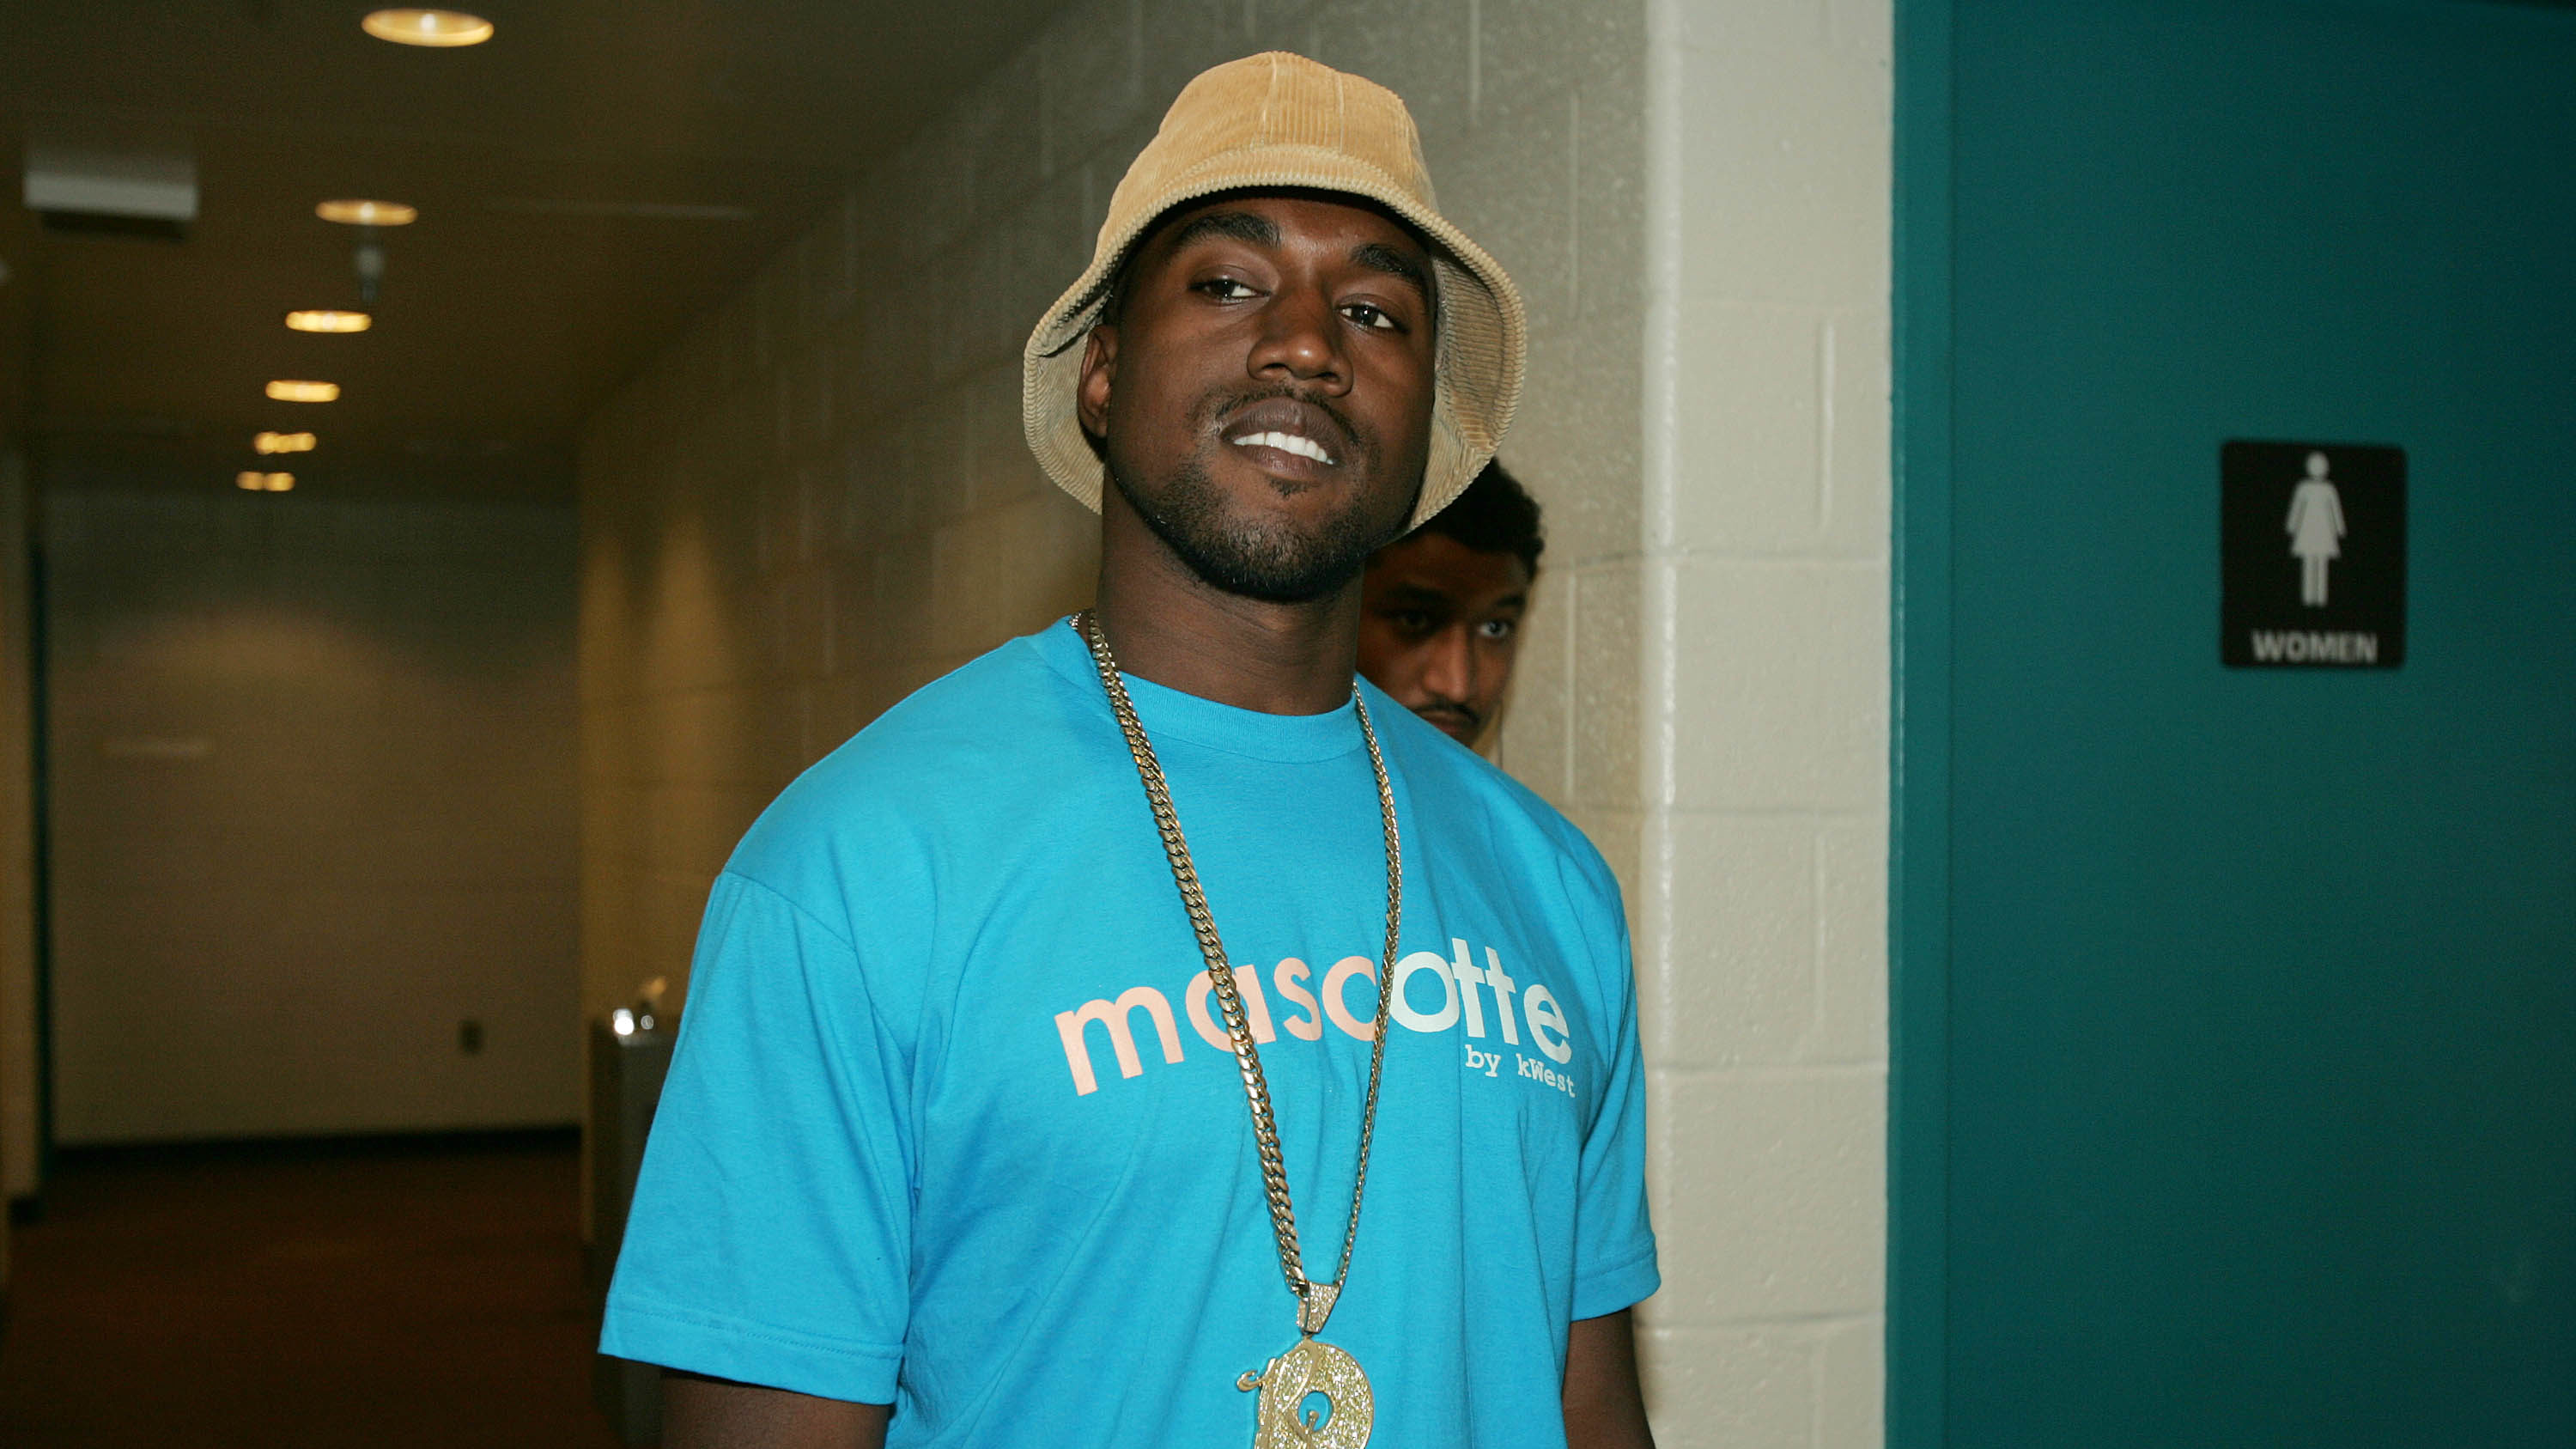 A Look at Kanye West's Fashion Design Evolution Over the Years - Old Kanye  Fashion